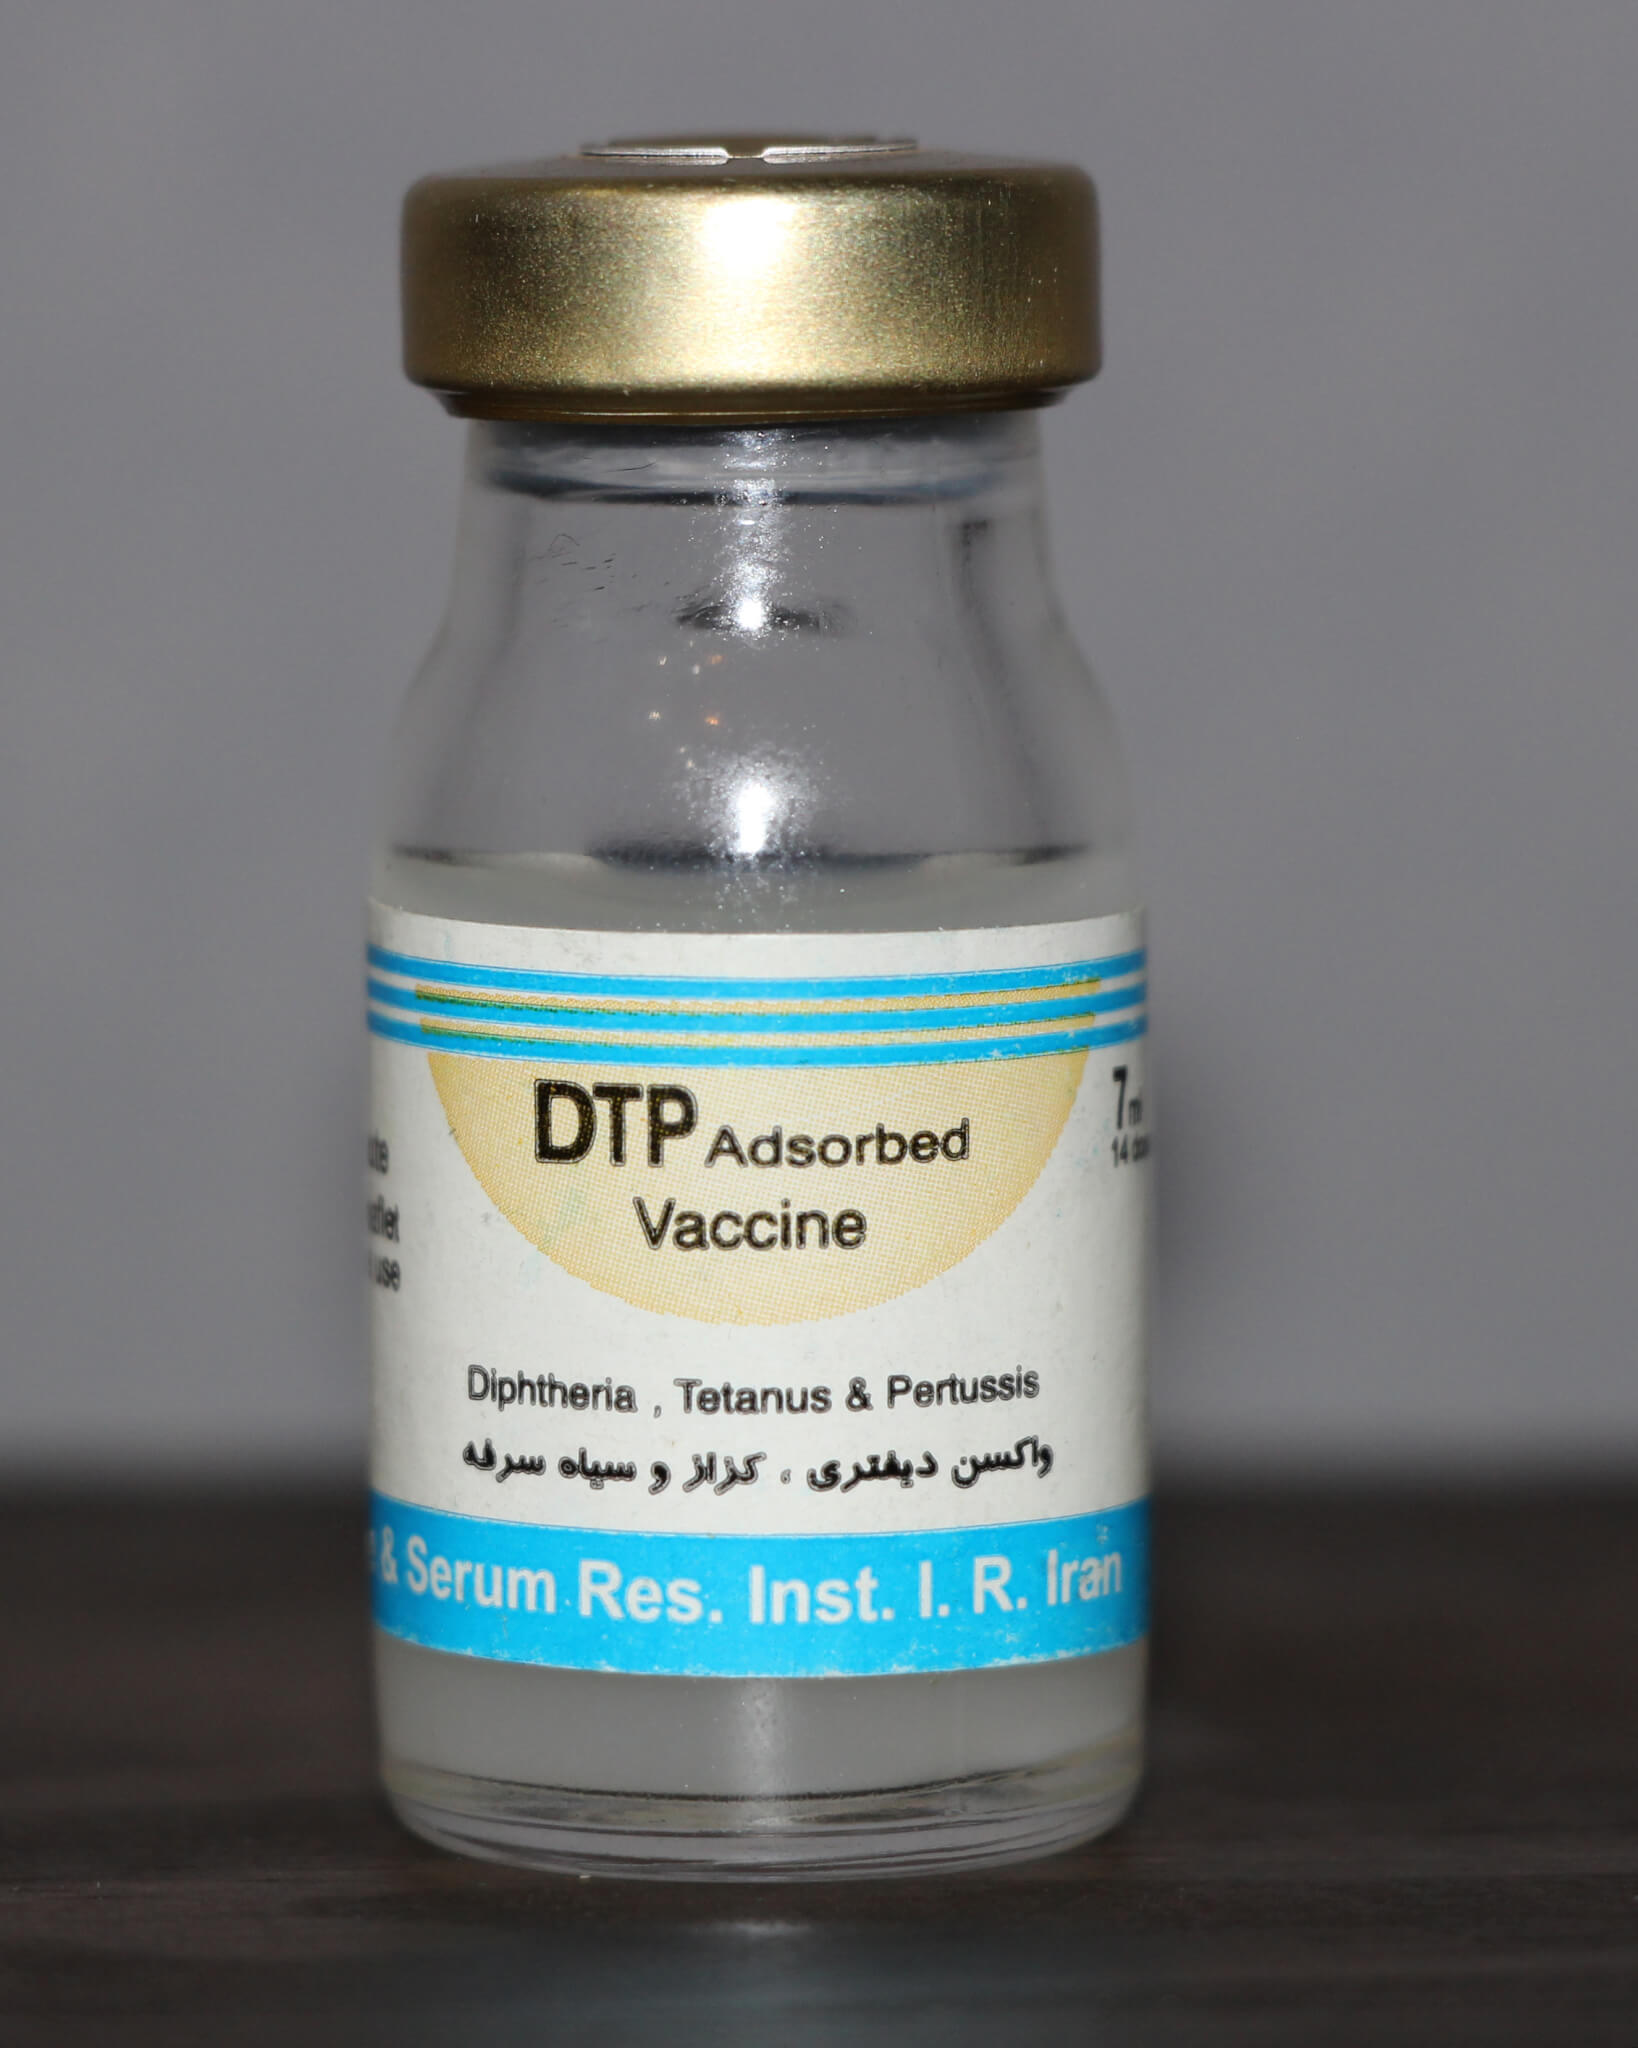 DTP Adsorbed Vaccine